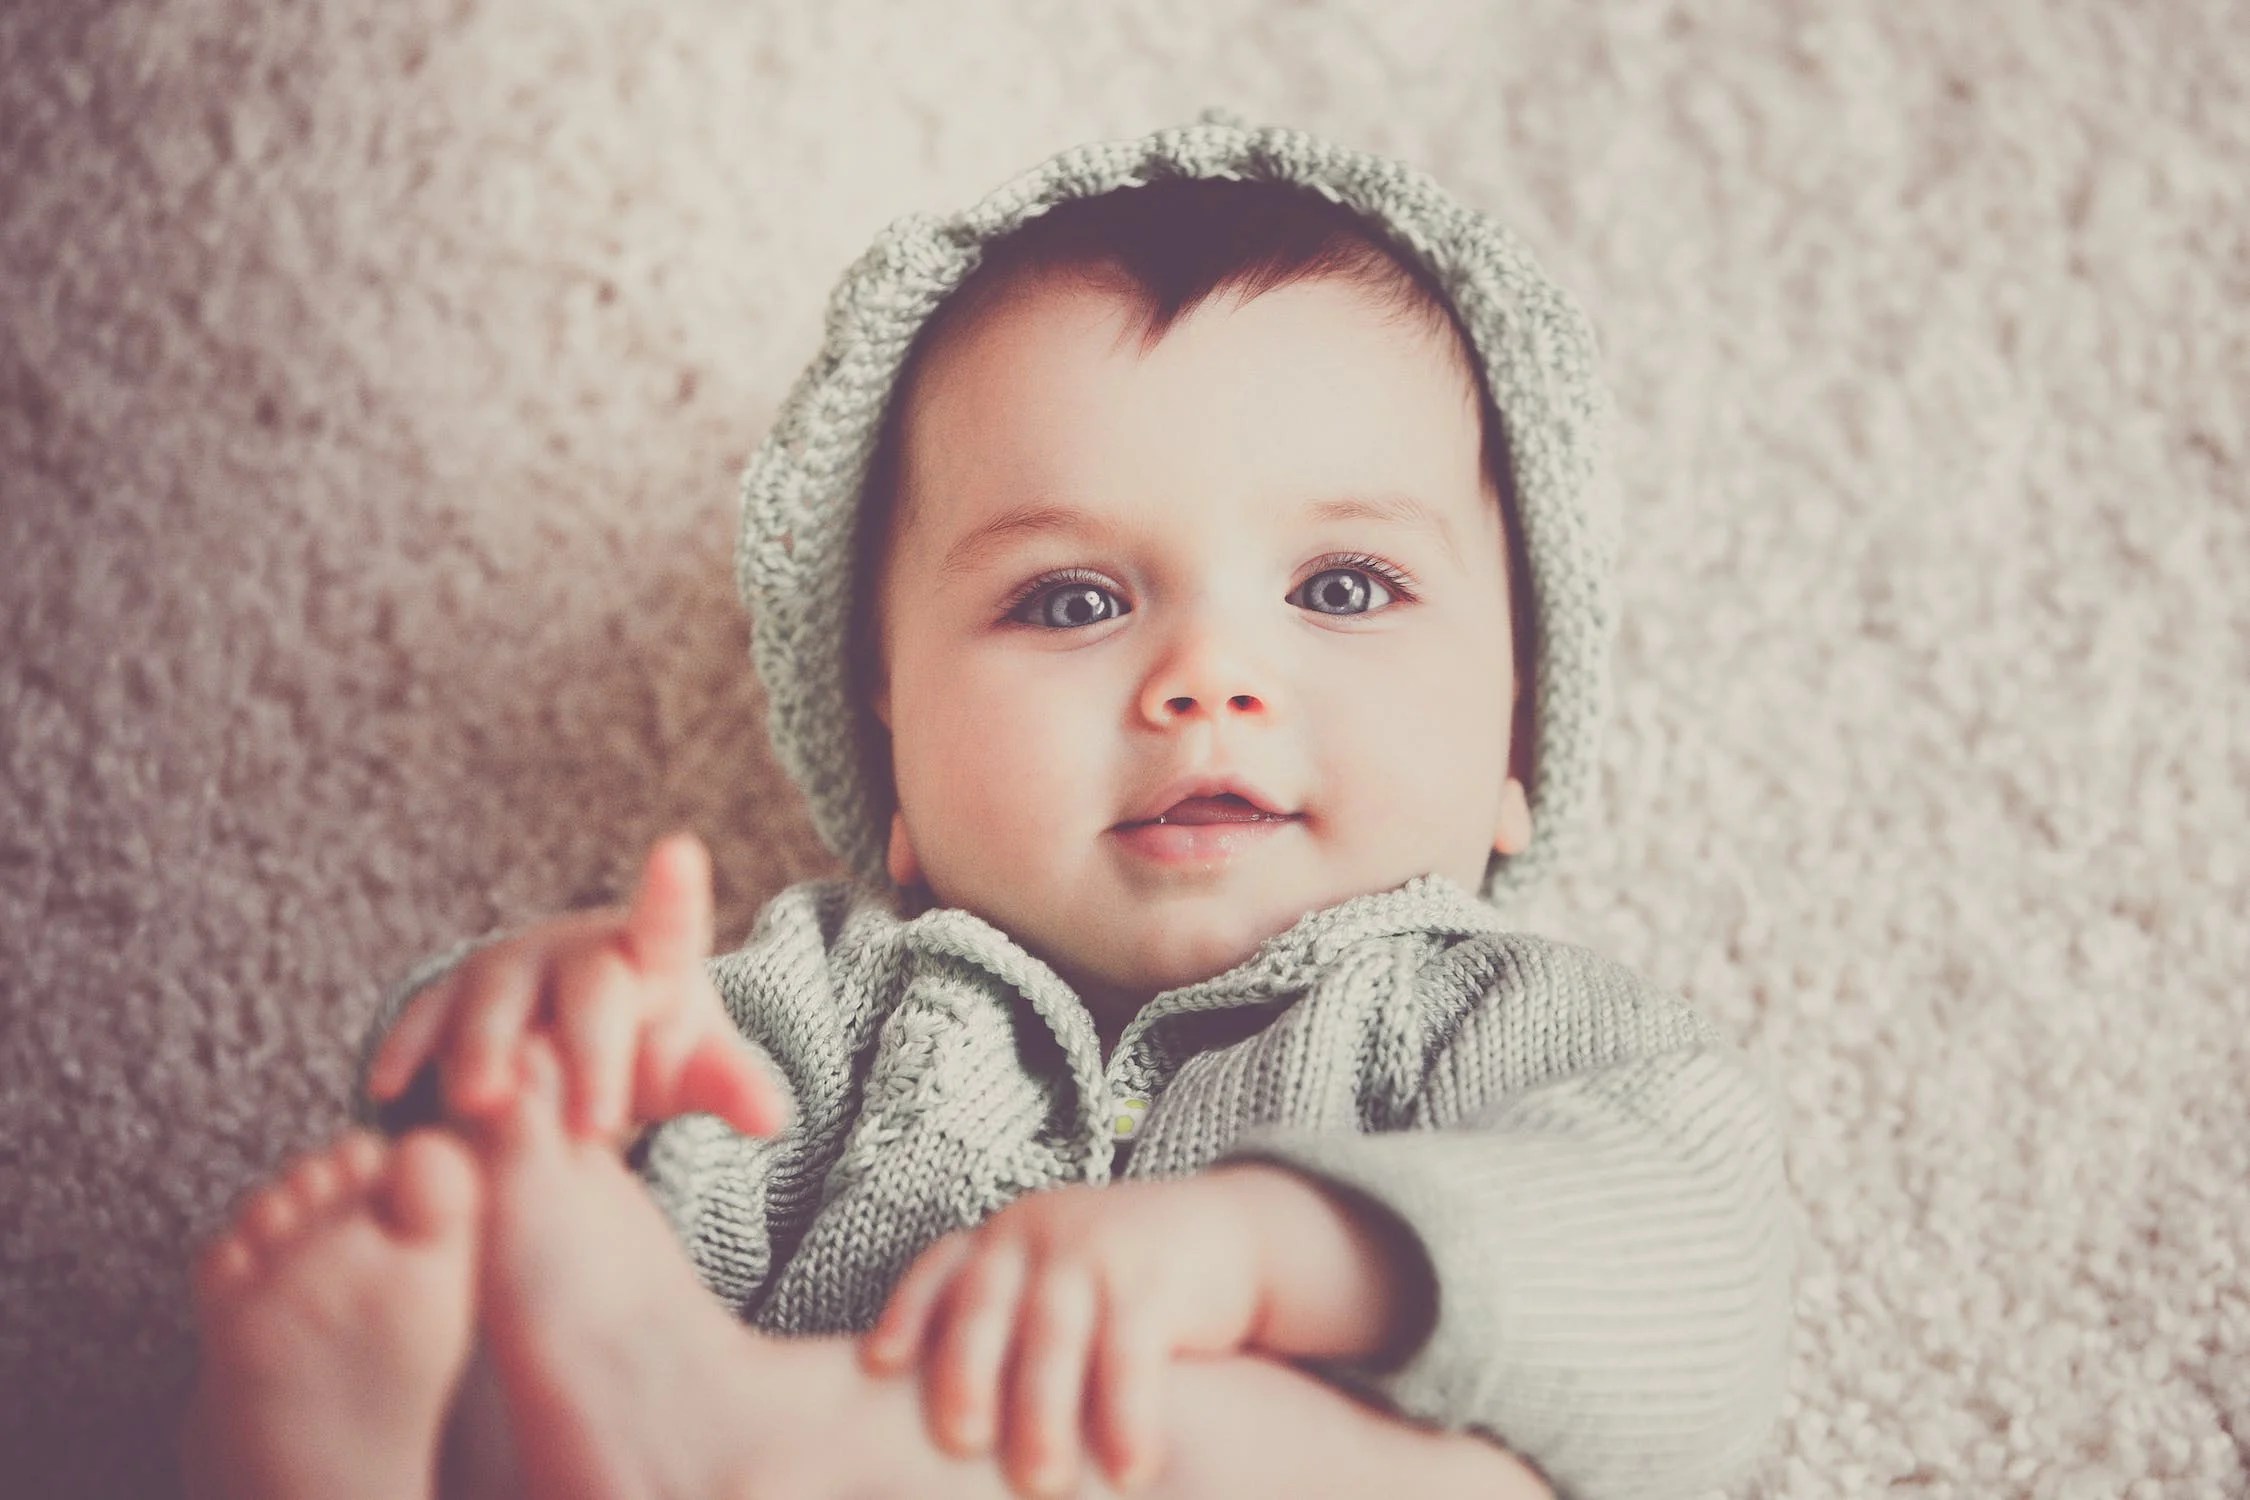  35 Baby Names That Are Cool Without Trying Too Hard